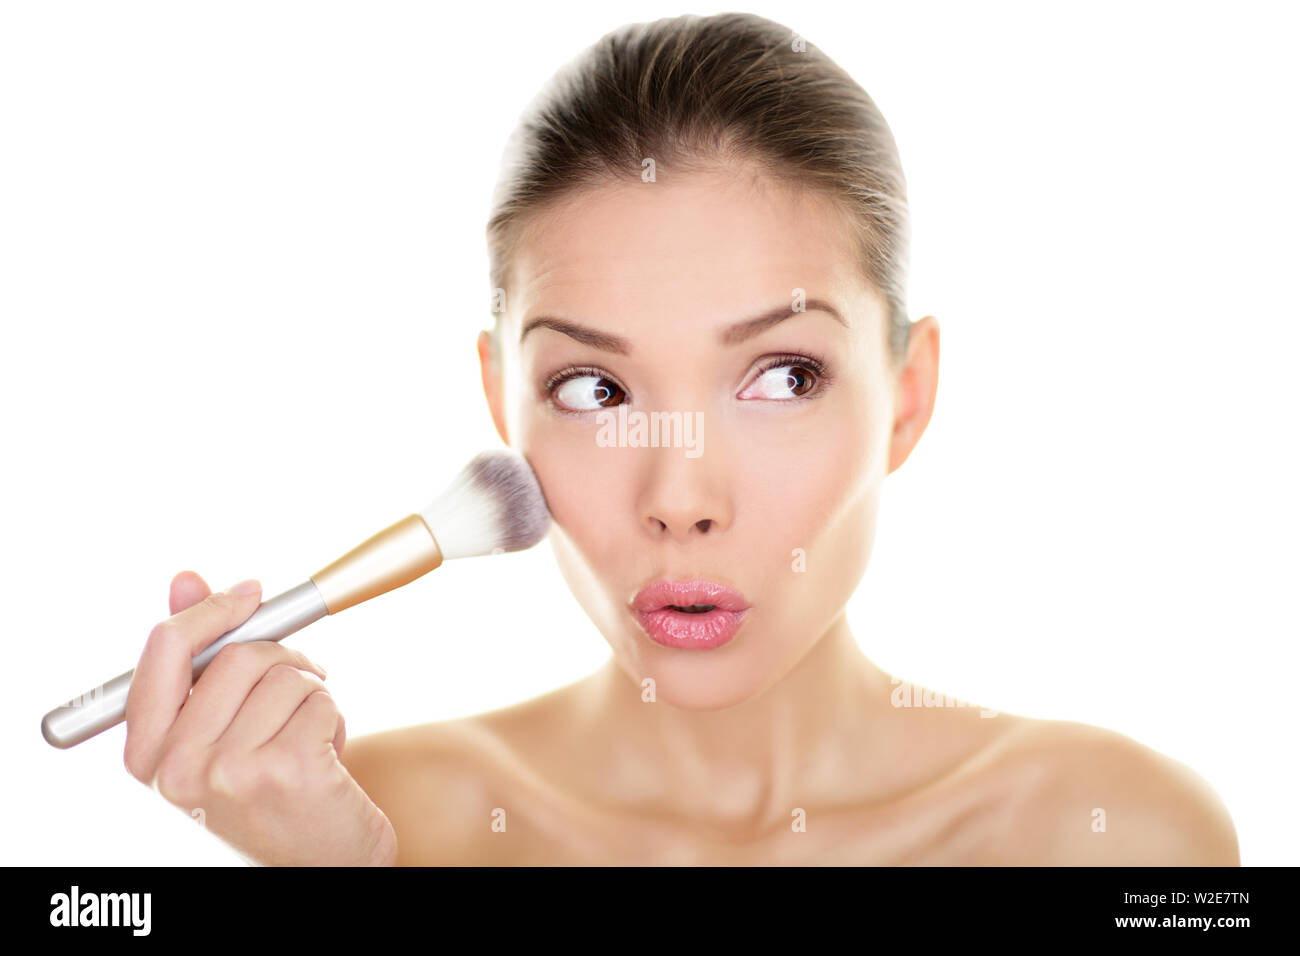 Makeup blush beauty woman looking funny away to side. Surprised cute adorable girl applying make-up on cheeks make up brush looking sideways. Mixed race Asian Chinese / Caucasian model 20s Isolated. Stock Photo